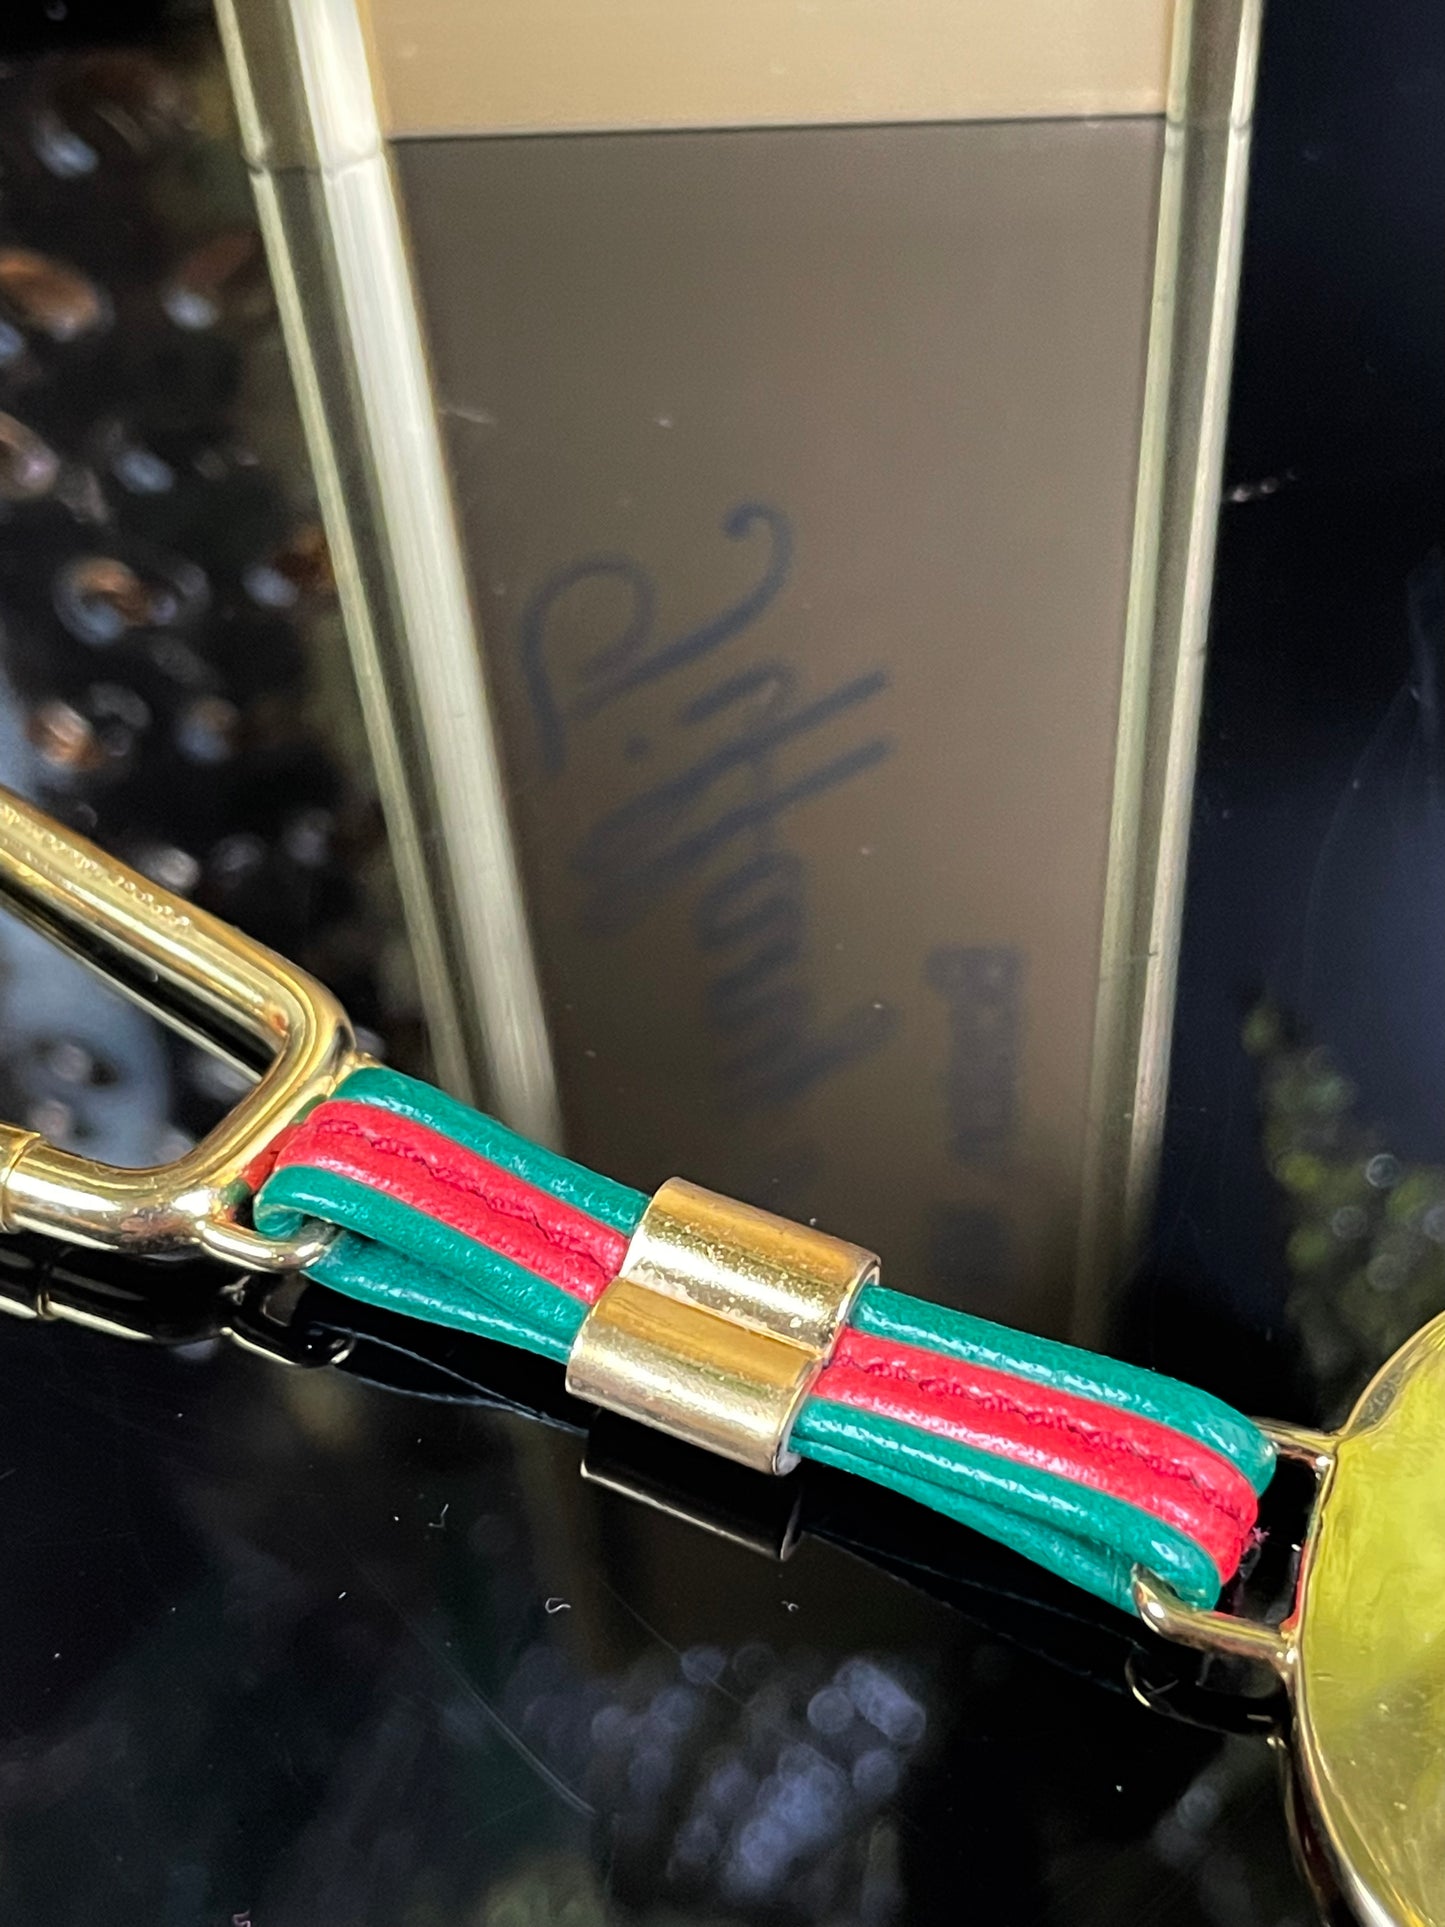 Authentic Gucci Keychain